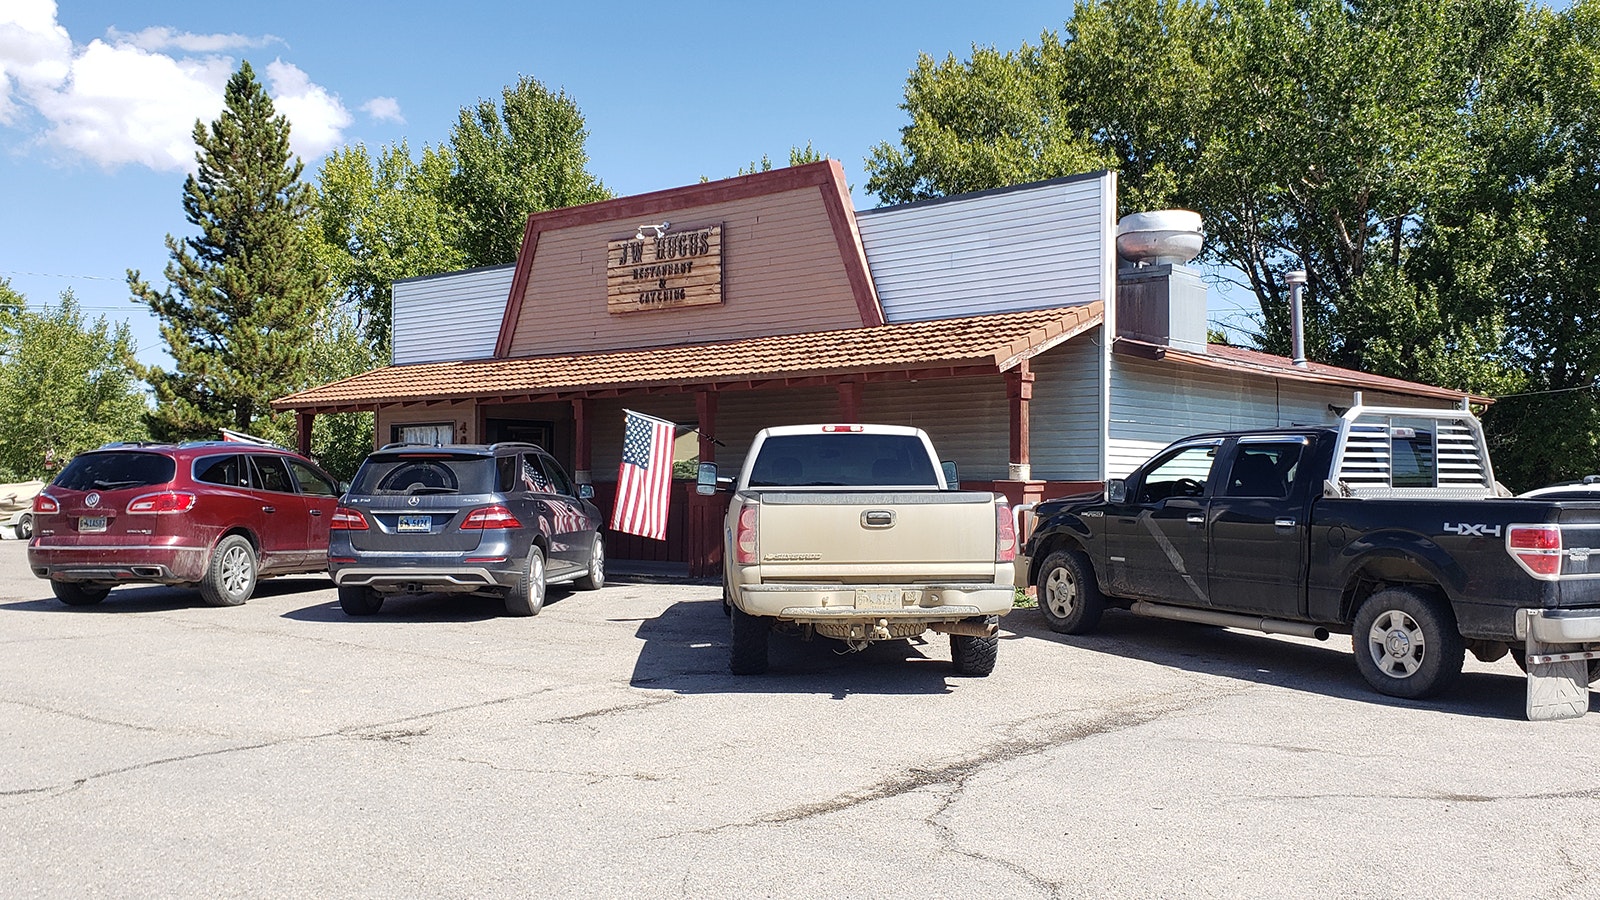 While it's not the original building of the J.W. Hugus Co. Mercantile, J.W. Hugus Restaurant & Catering is a nod to the owner's great-great-great-grandfather.